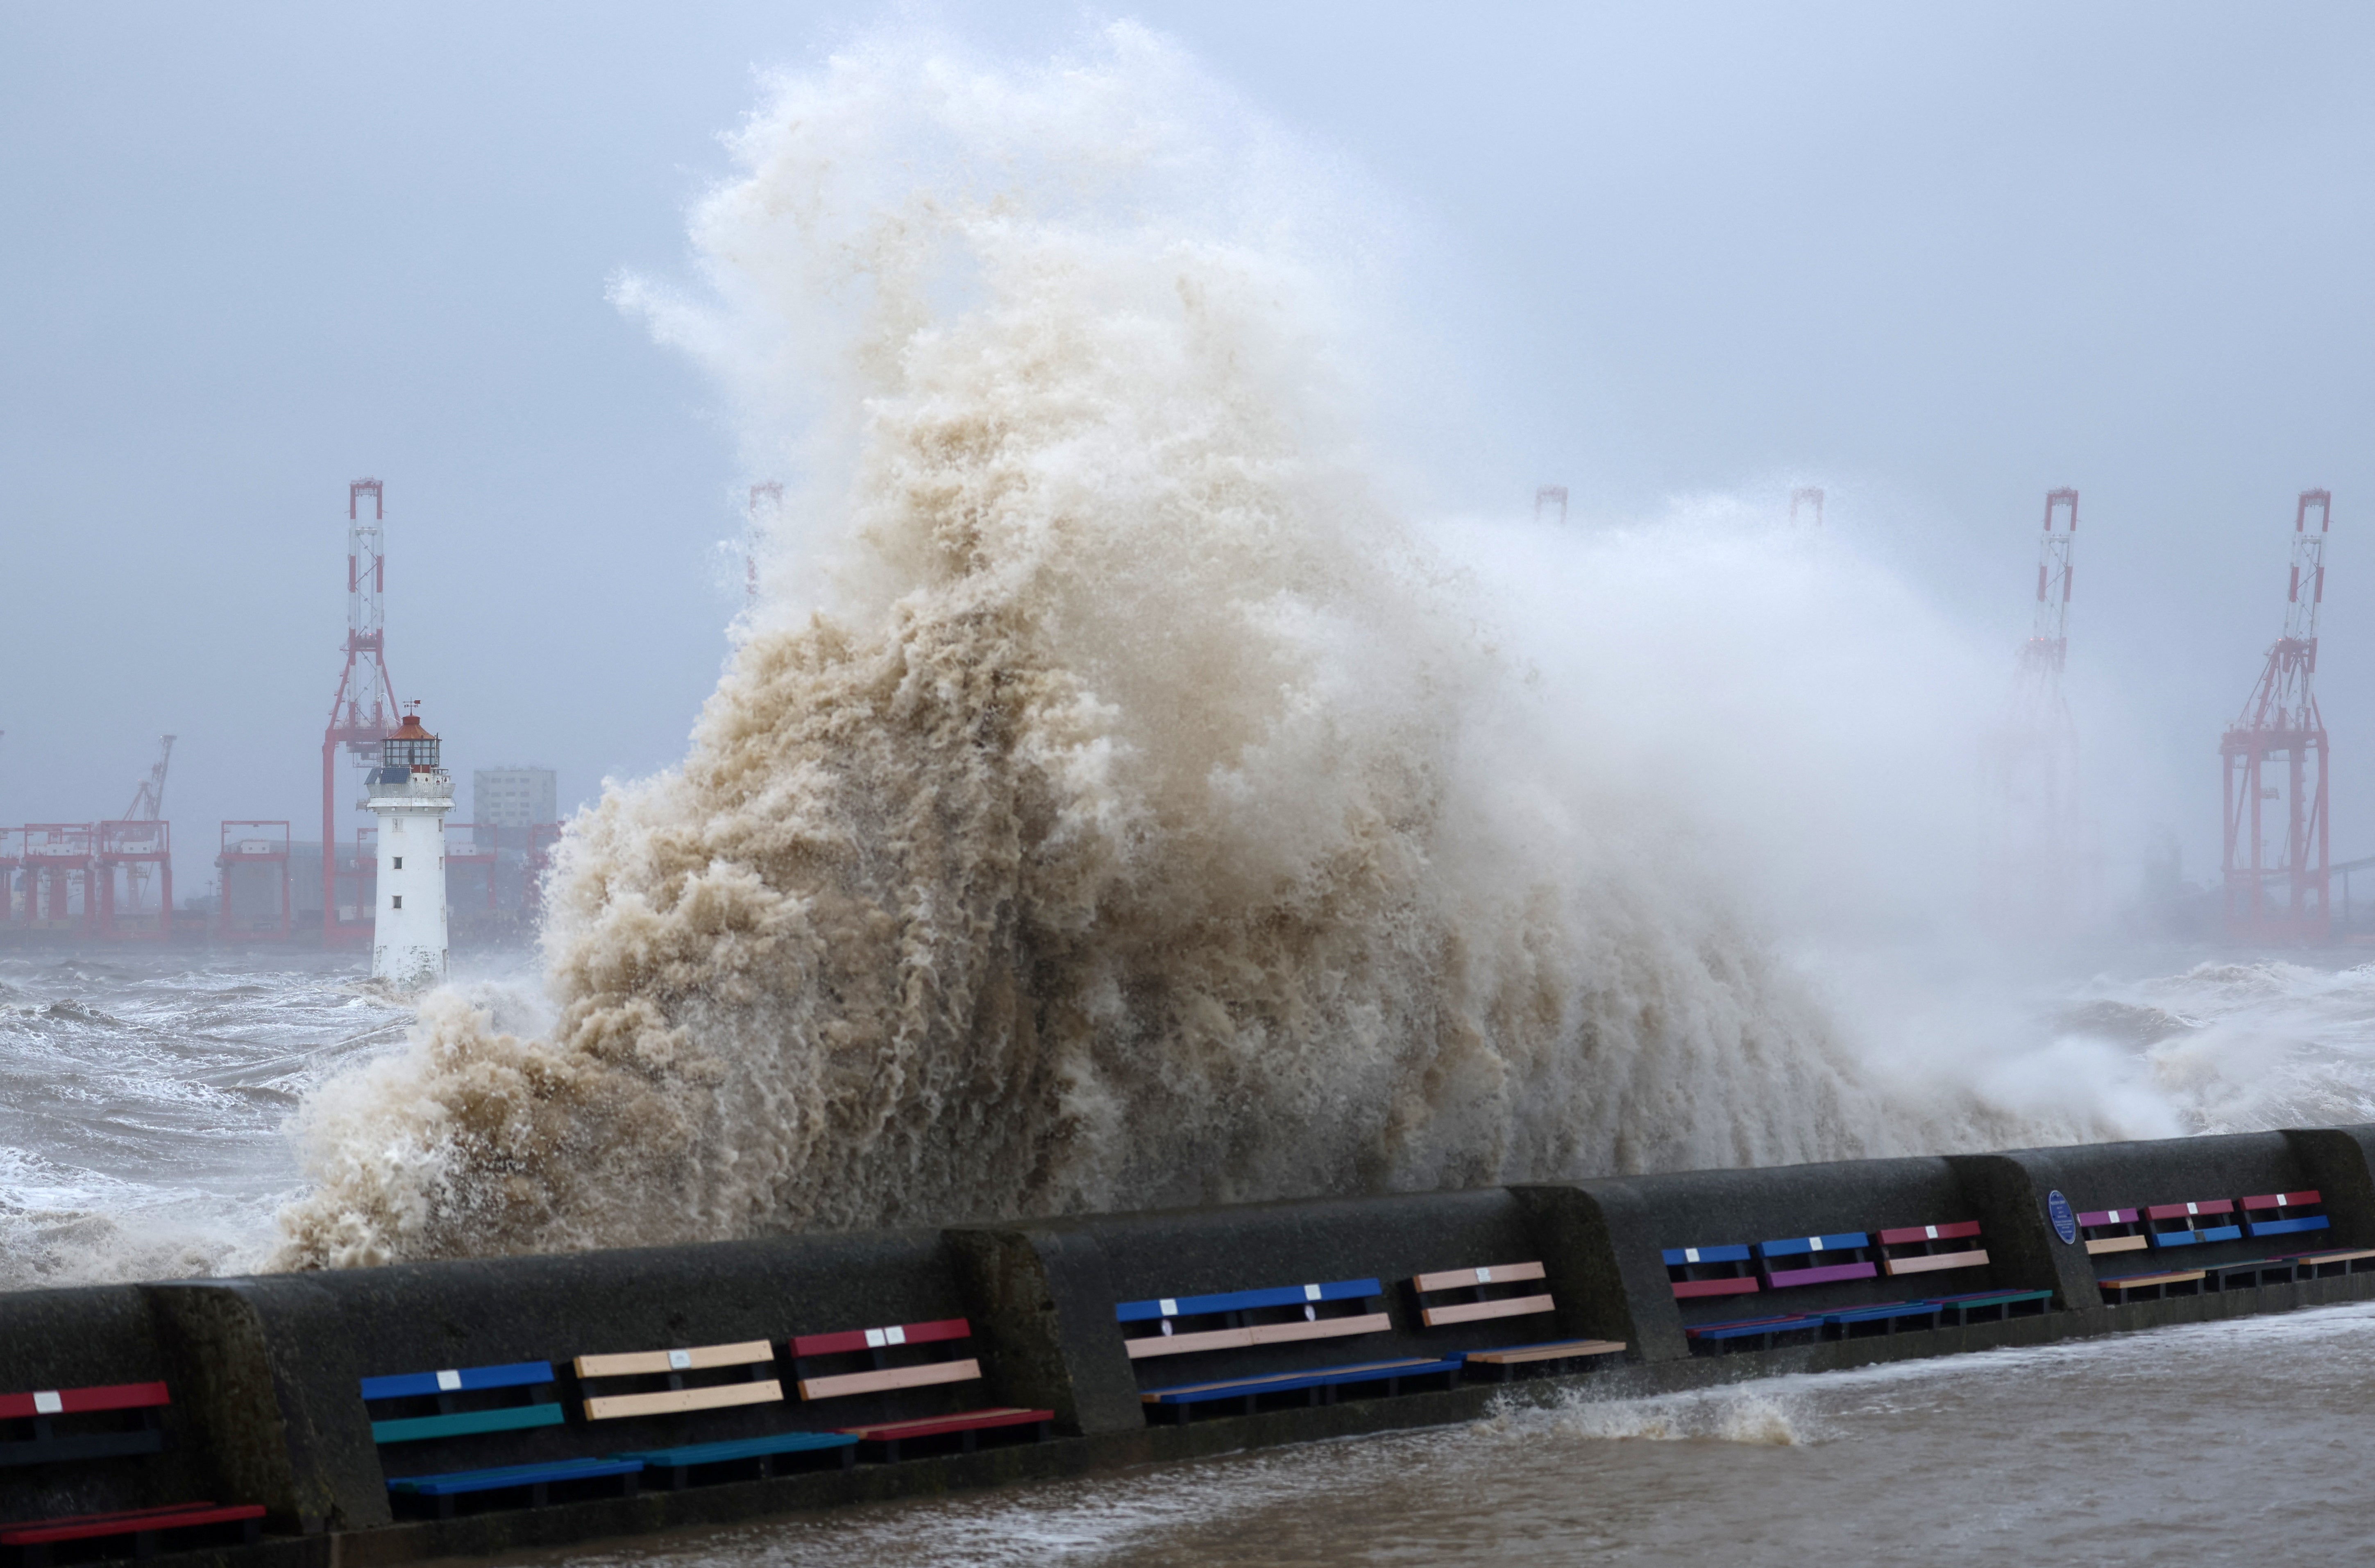 Waves crash over the sea wall during a storm in Brighton